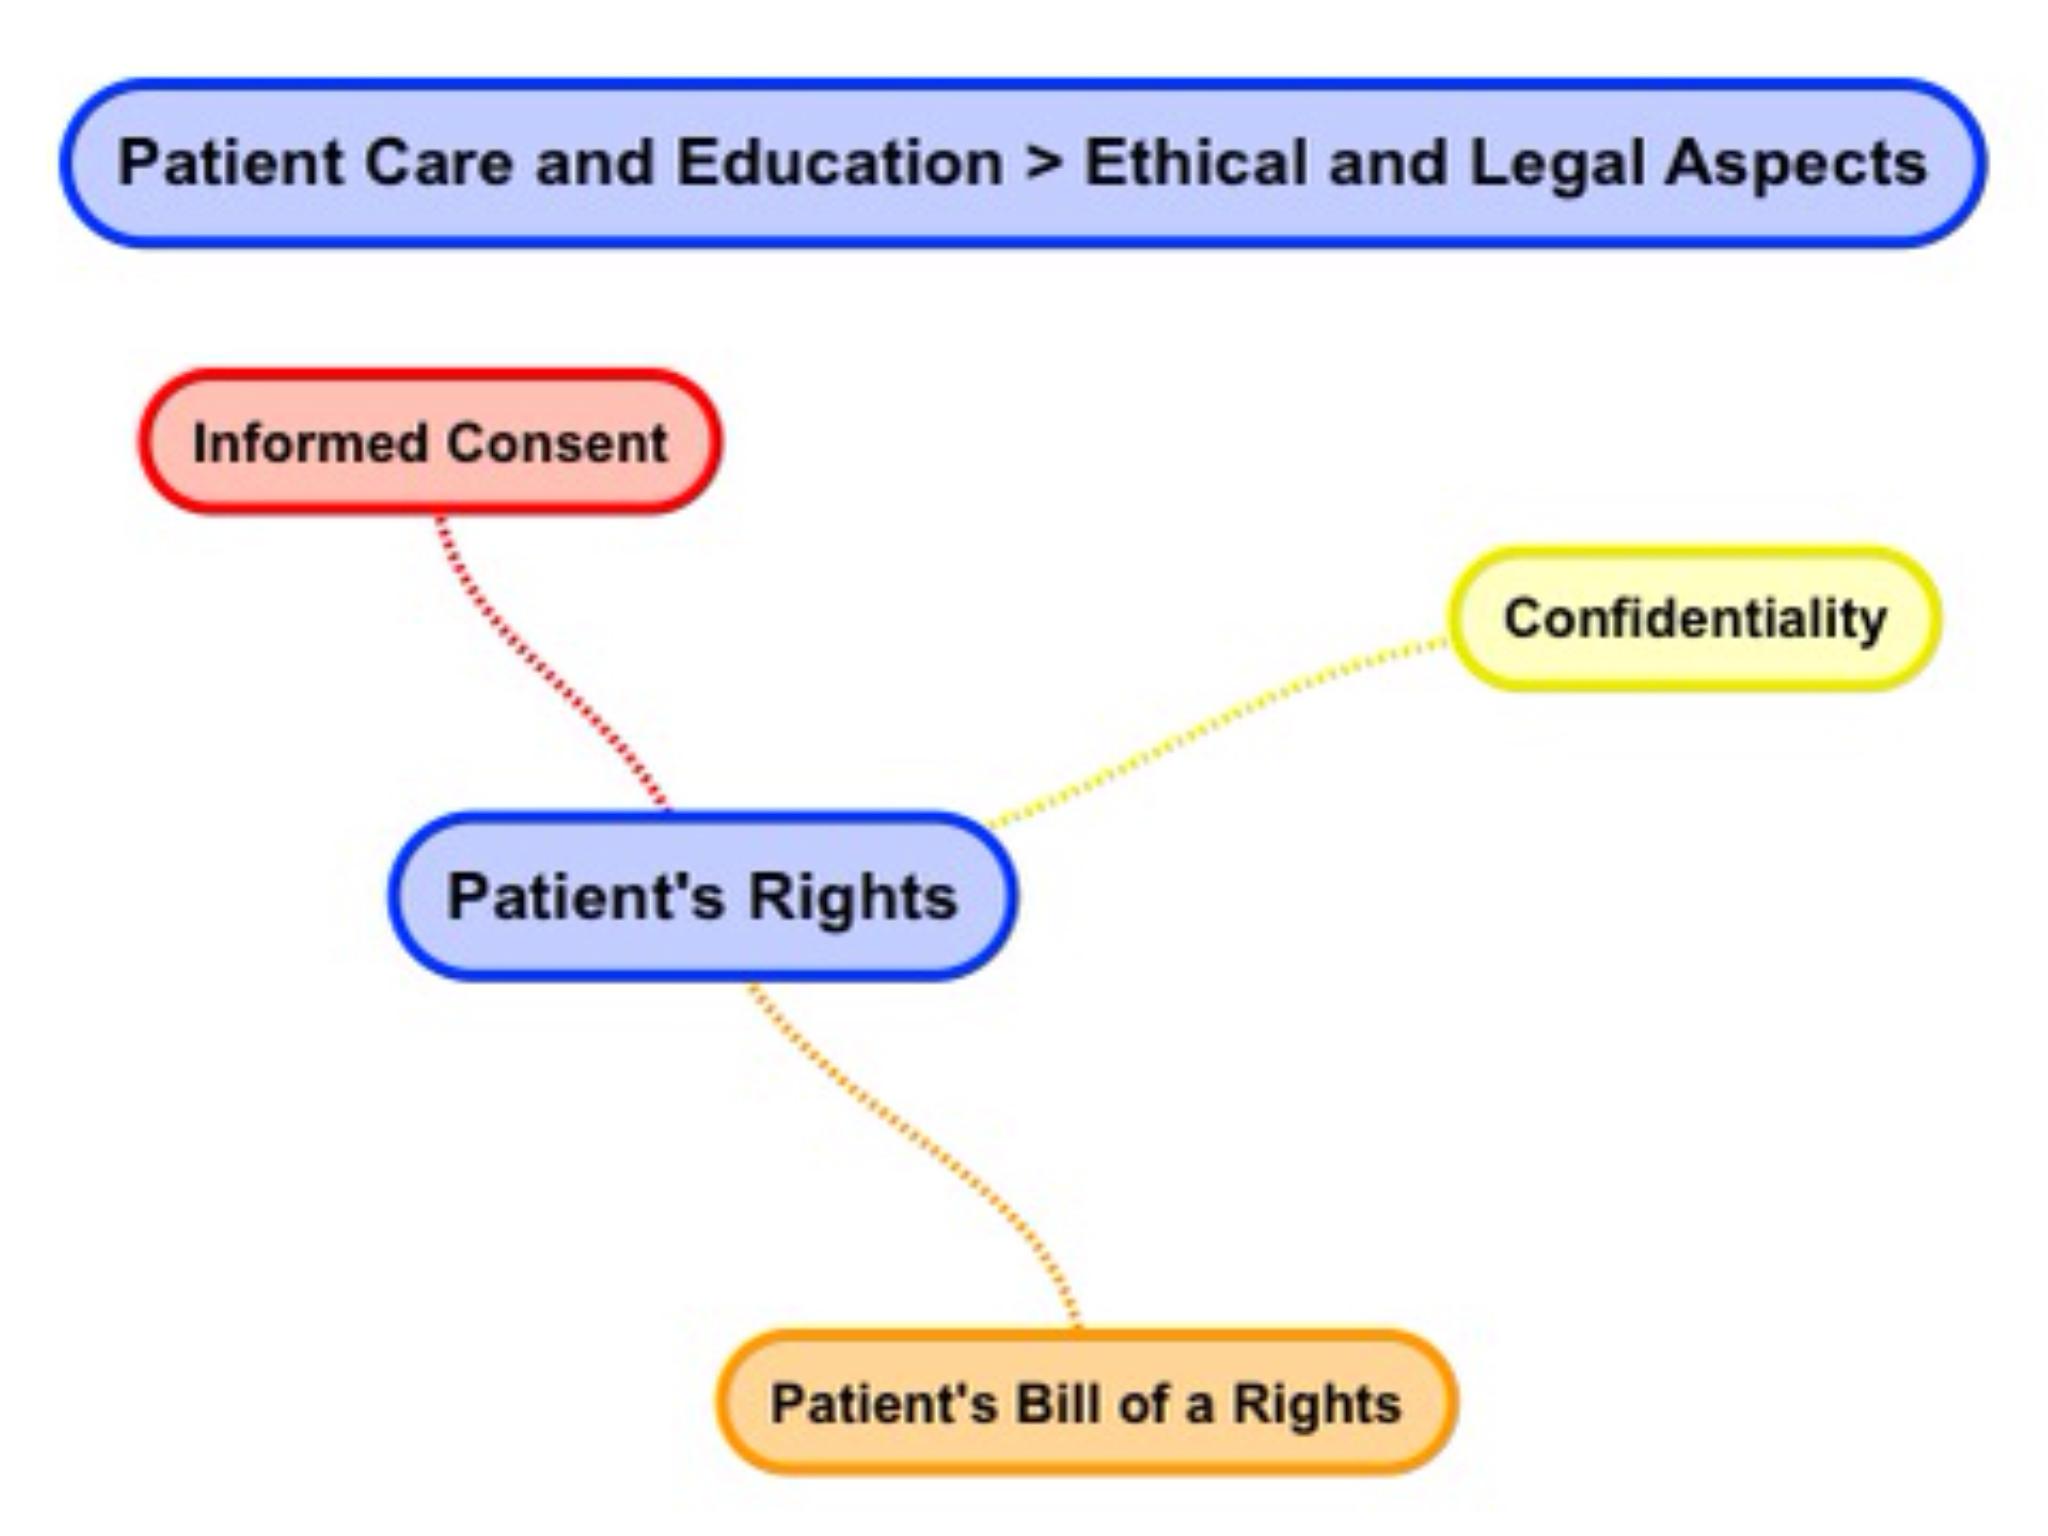 Patient's Rights